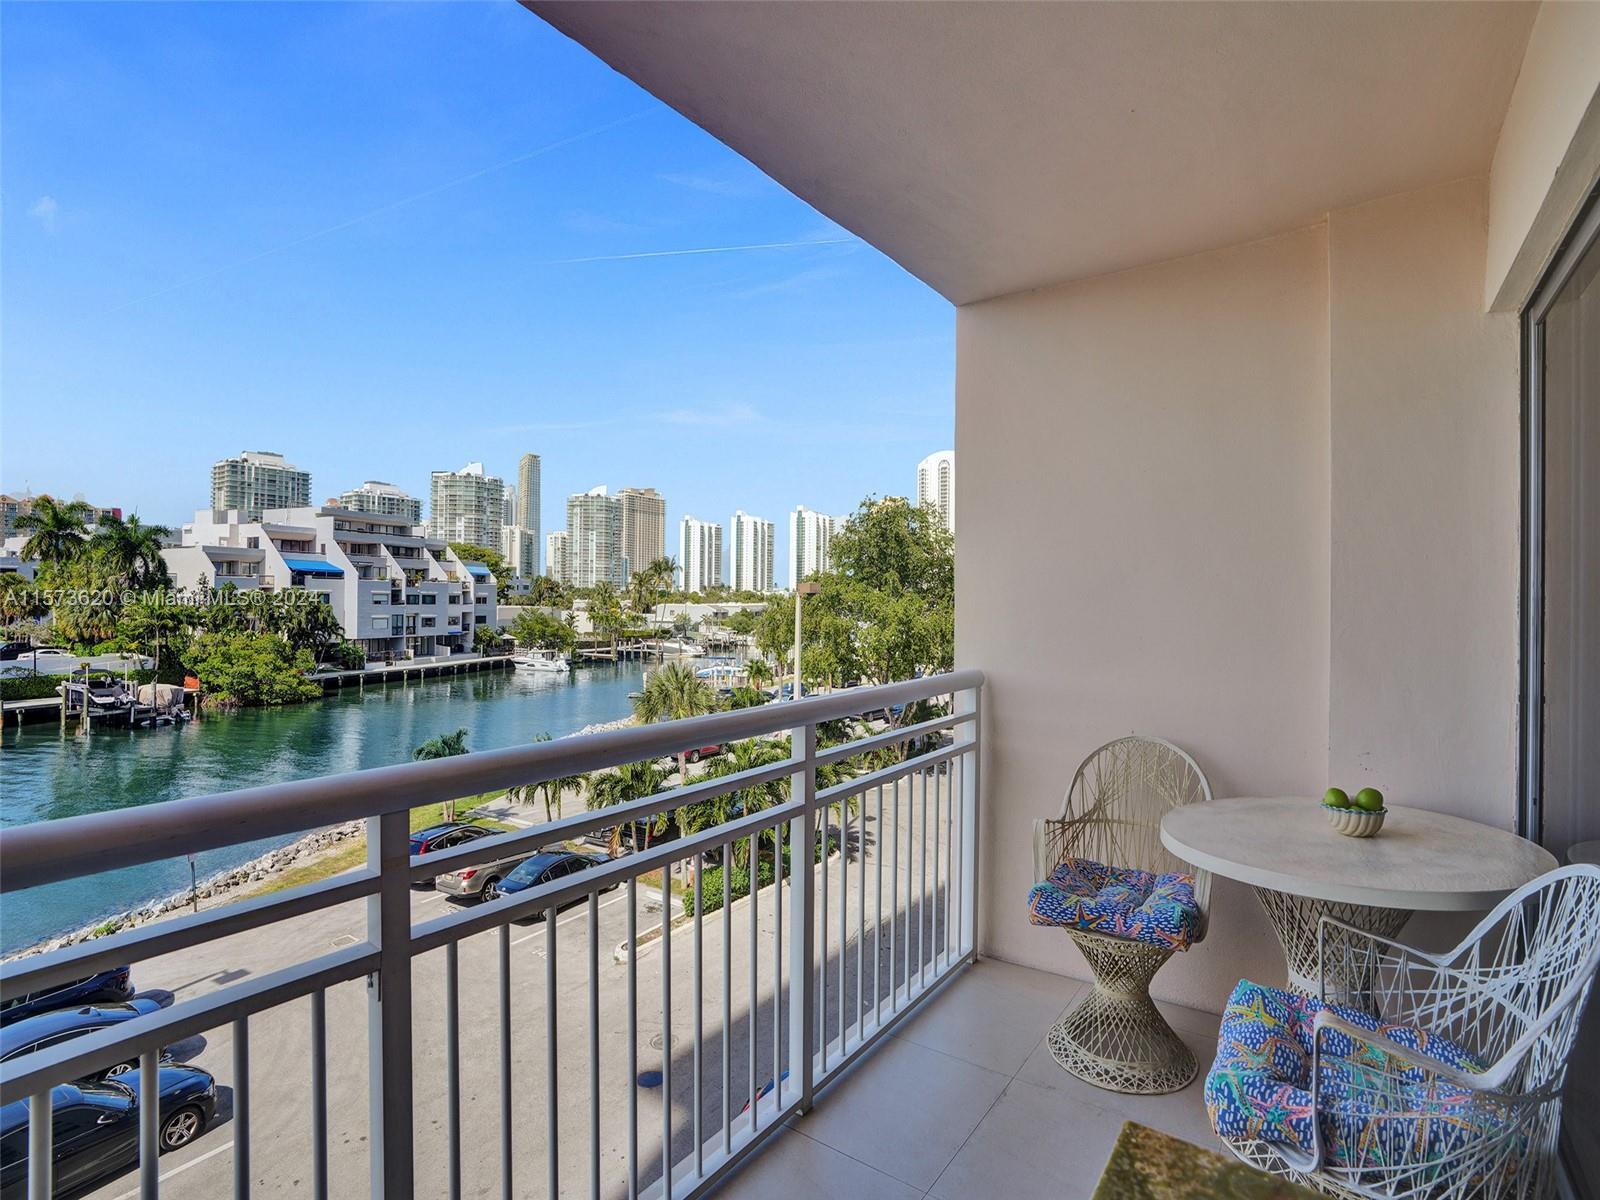 Step into the captivating Intracoastal views from this refined condo at Coastal Towers. Completely r